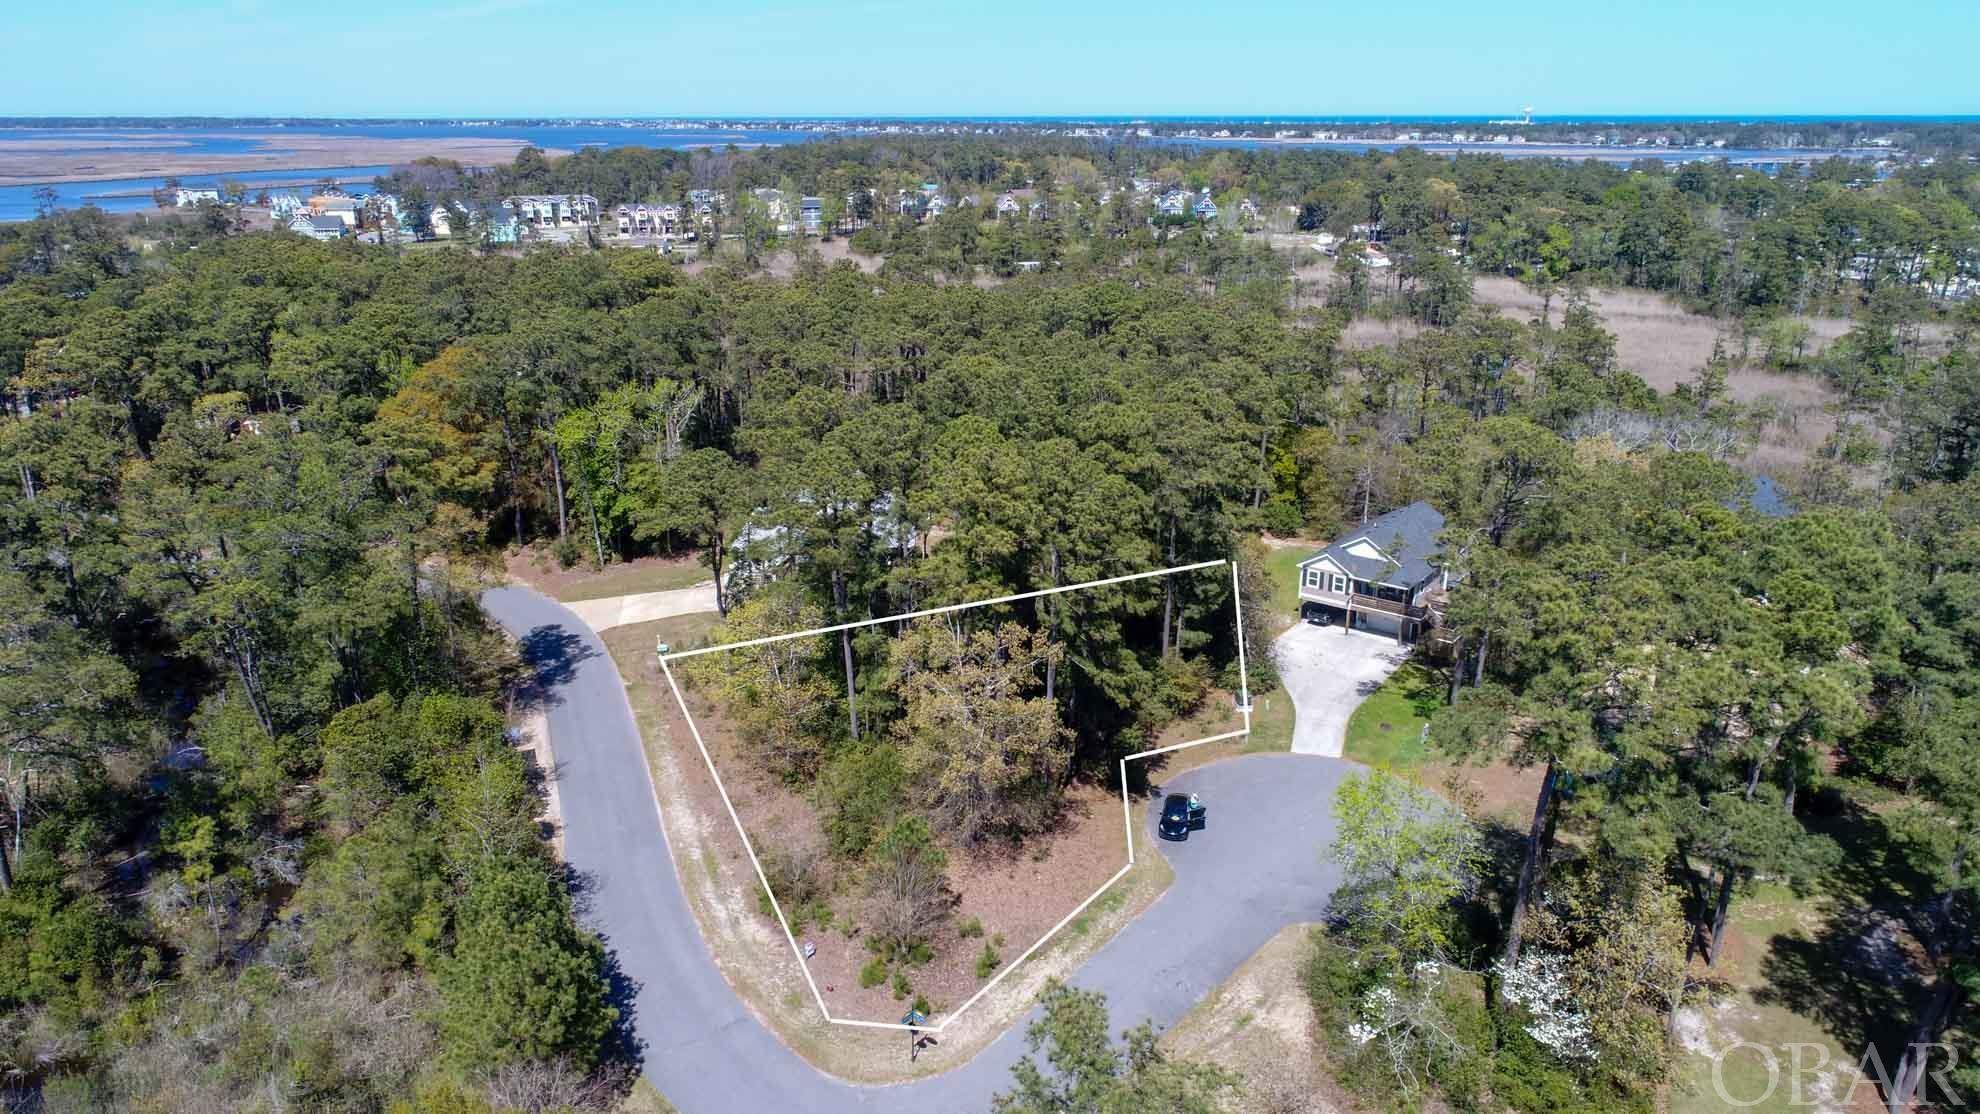 Sunrise Crossing, one of the last buildable lots in the community. Sought after area with privacy and convenience to all the Outer Banks has to offer. Sellers have had a custom 4BR, 3BA home drawn for the lot by Florez & Florez, which will convey to new buyers. The community offers newer homes and a community dock/pier. Near Shopping, restaurants, schools, Wright Memorial, bike/walking paths and parks.  Public beach access just minutes away.